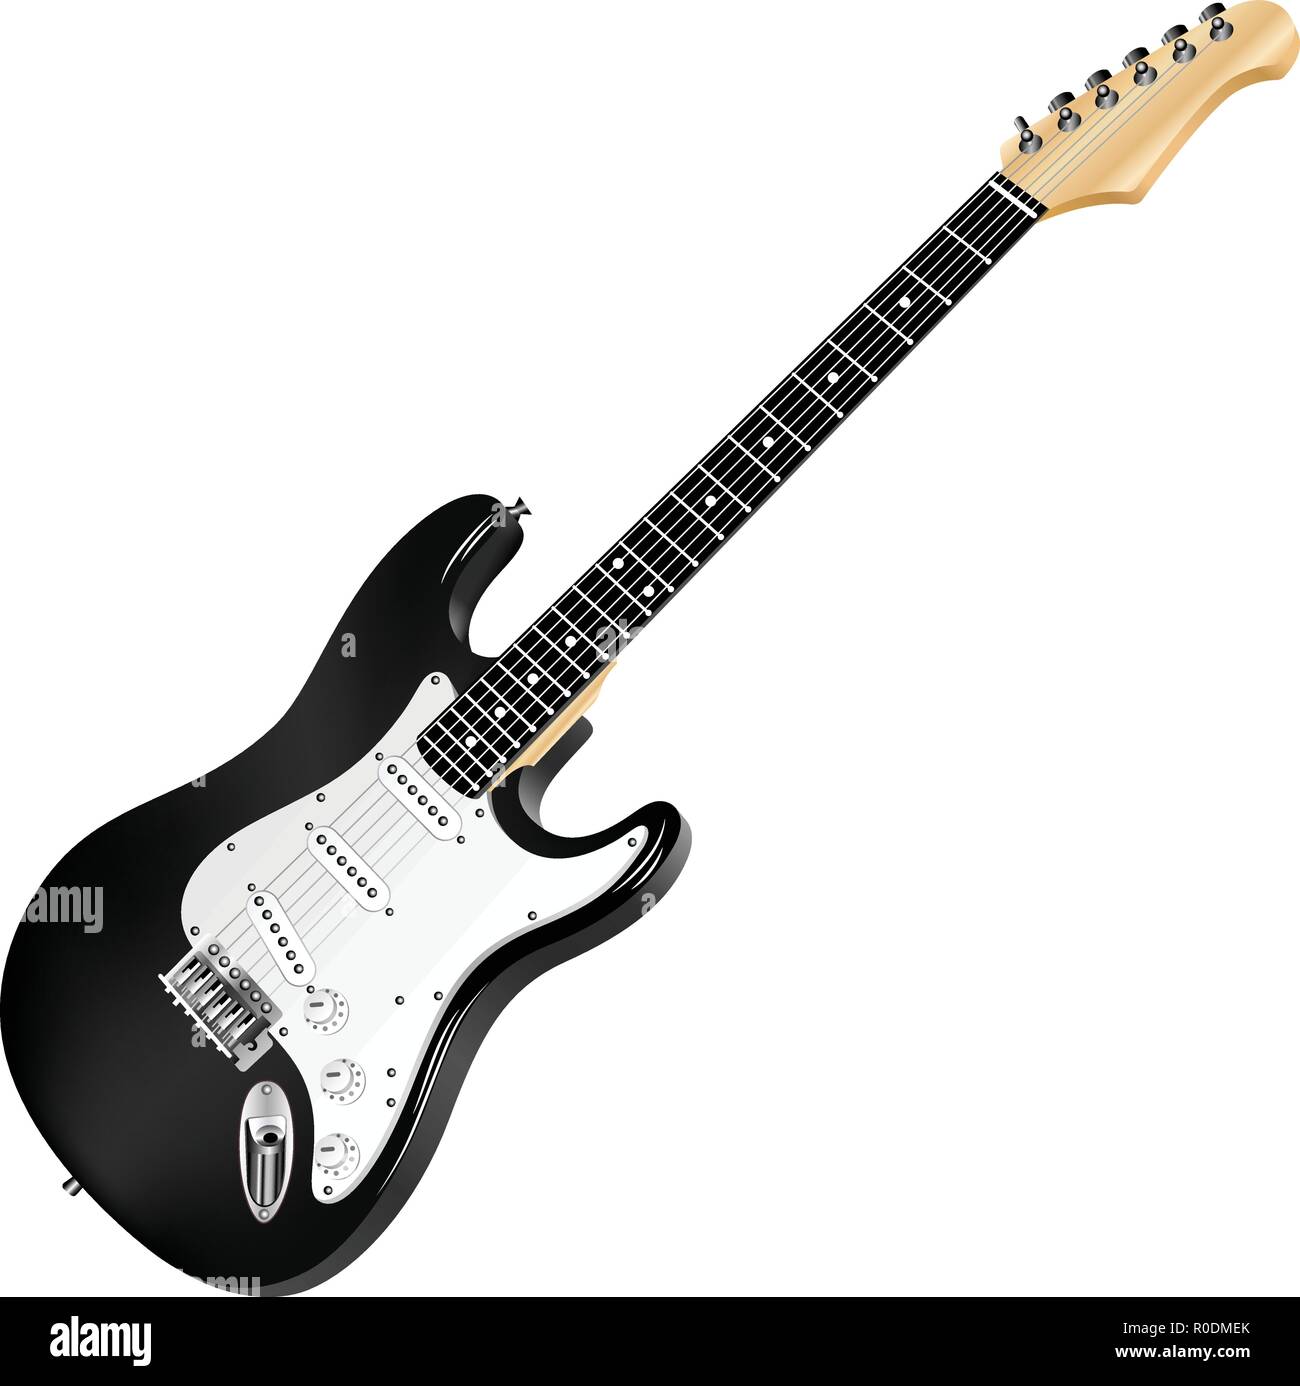 Black and white electric guitar, classic. Stock Vector